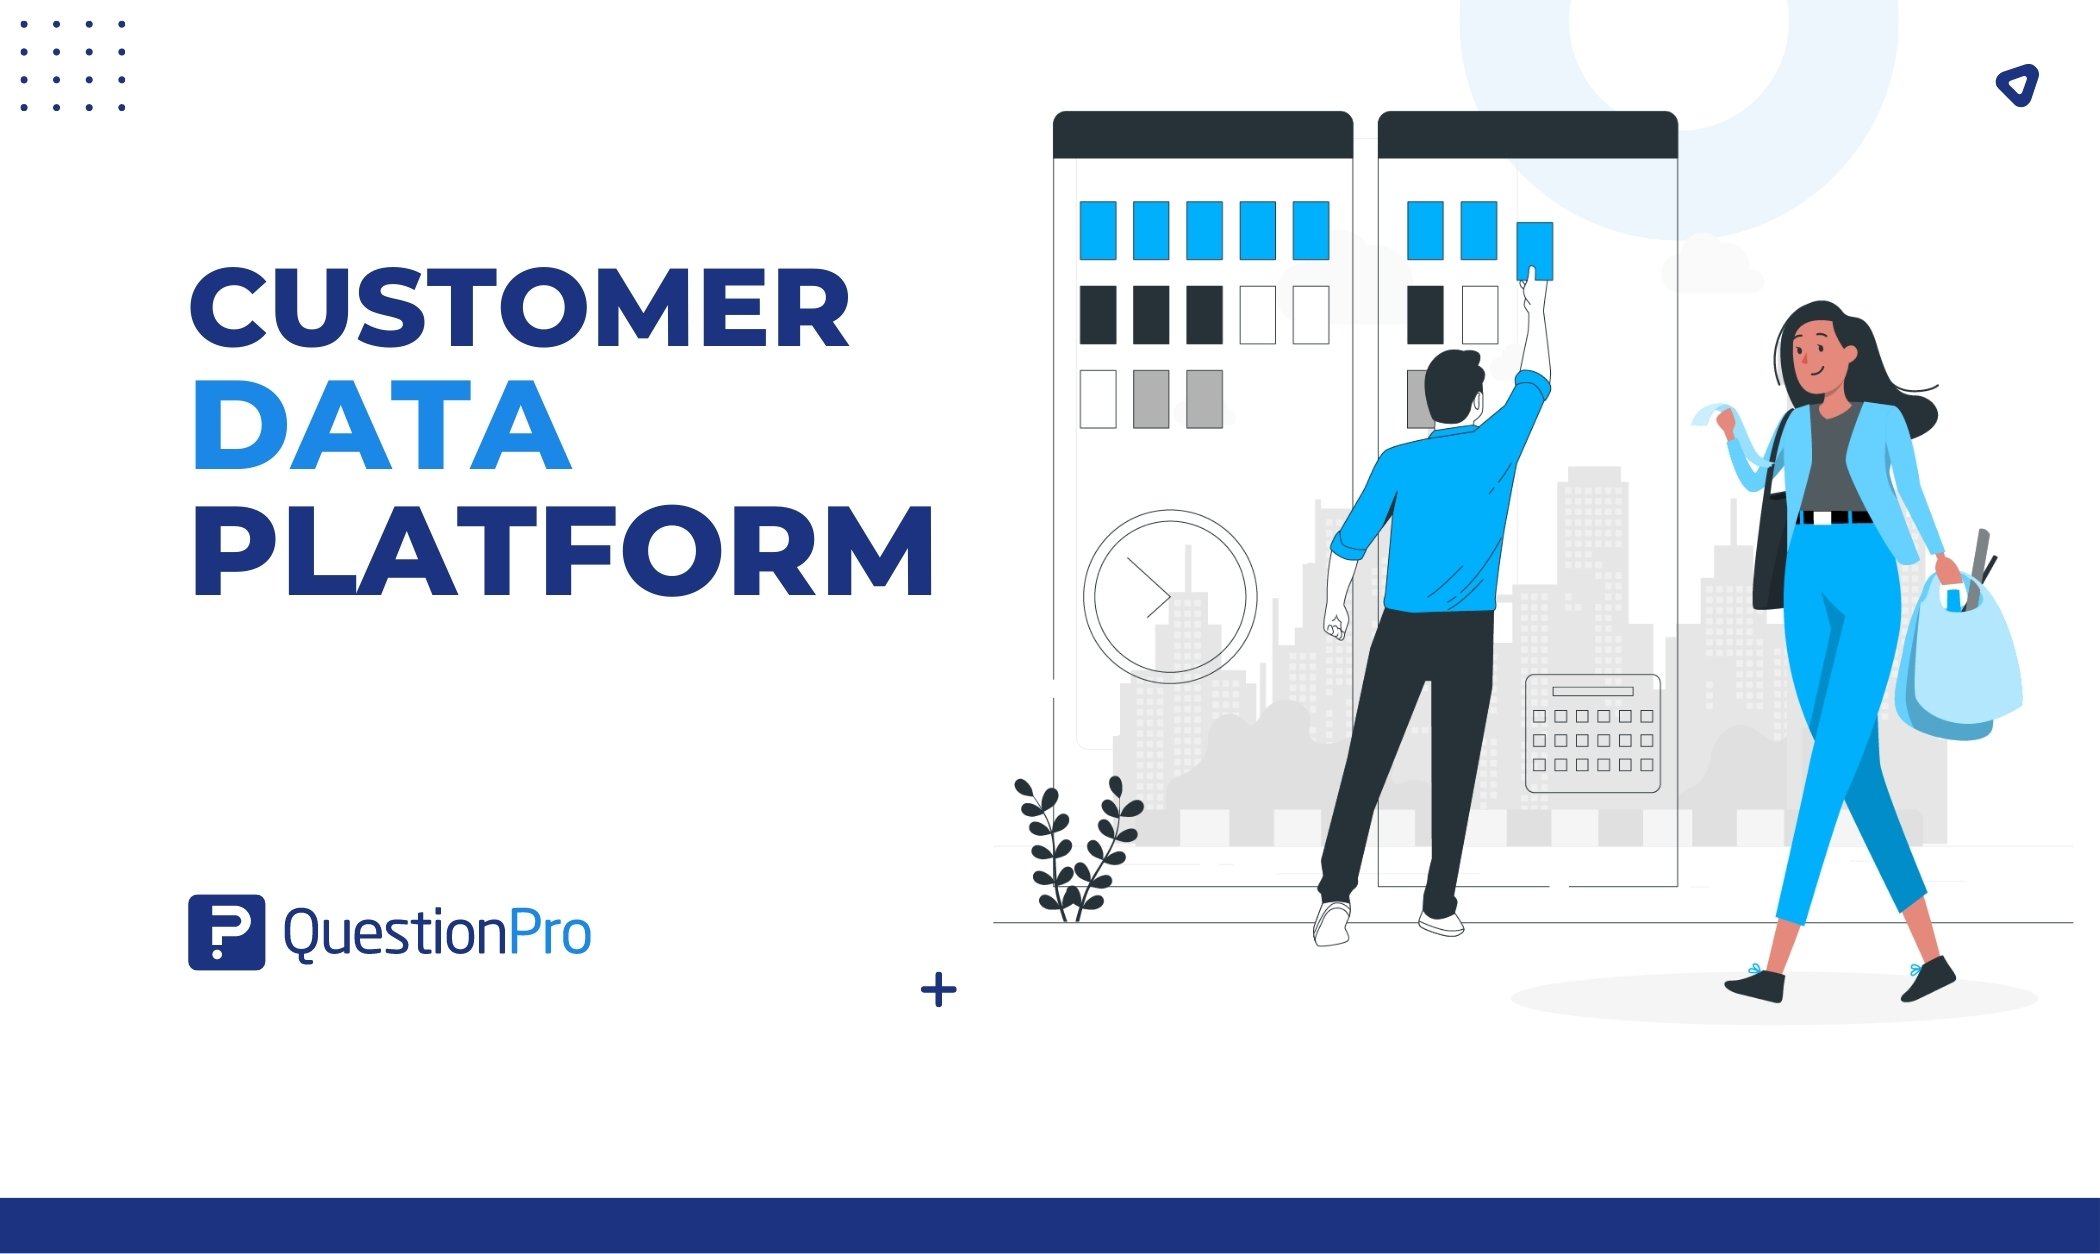 A Customer data platform lets you personalize interactions across channels and devices. It reduces data misuse risk and builds customer trust.